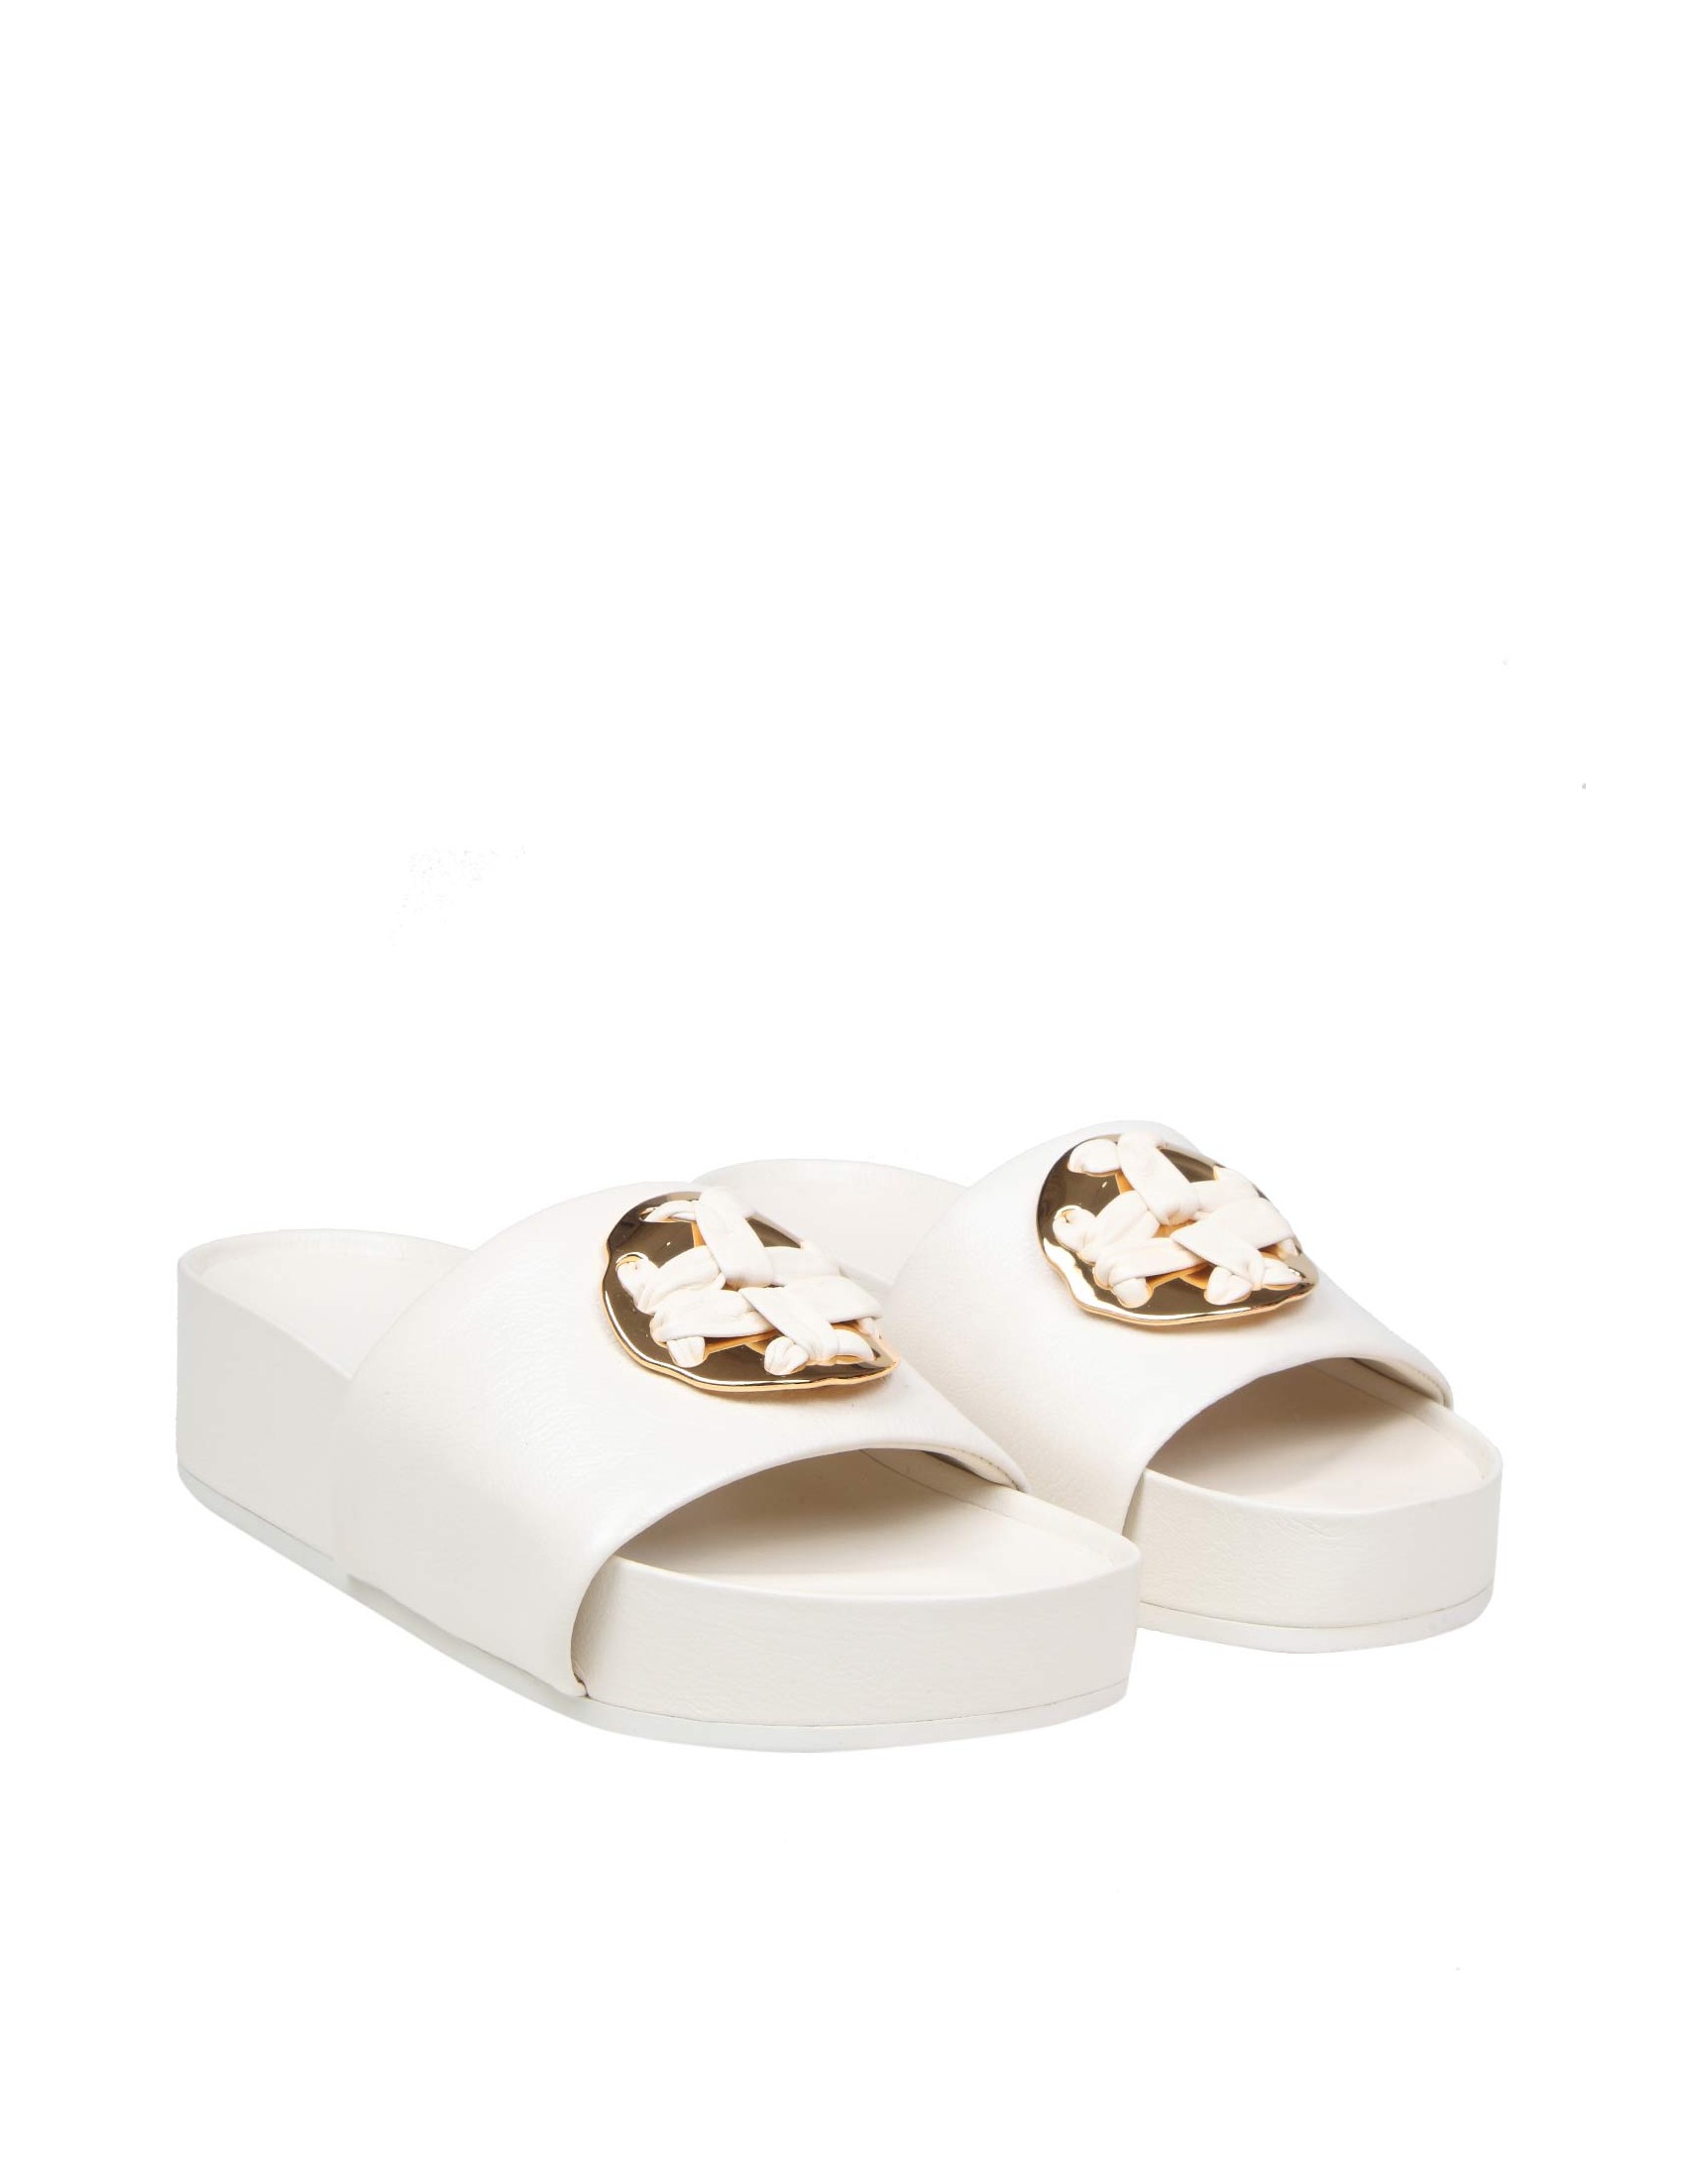 TORY BURCH SLIDE WOVEN IN CREAM COLOR LEATHER